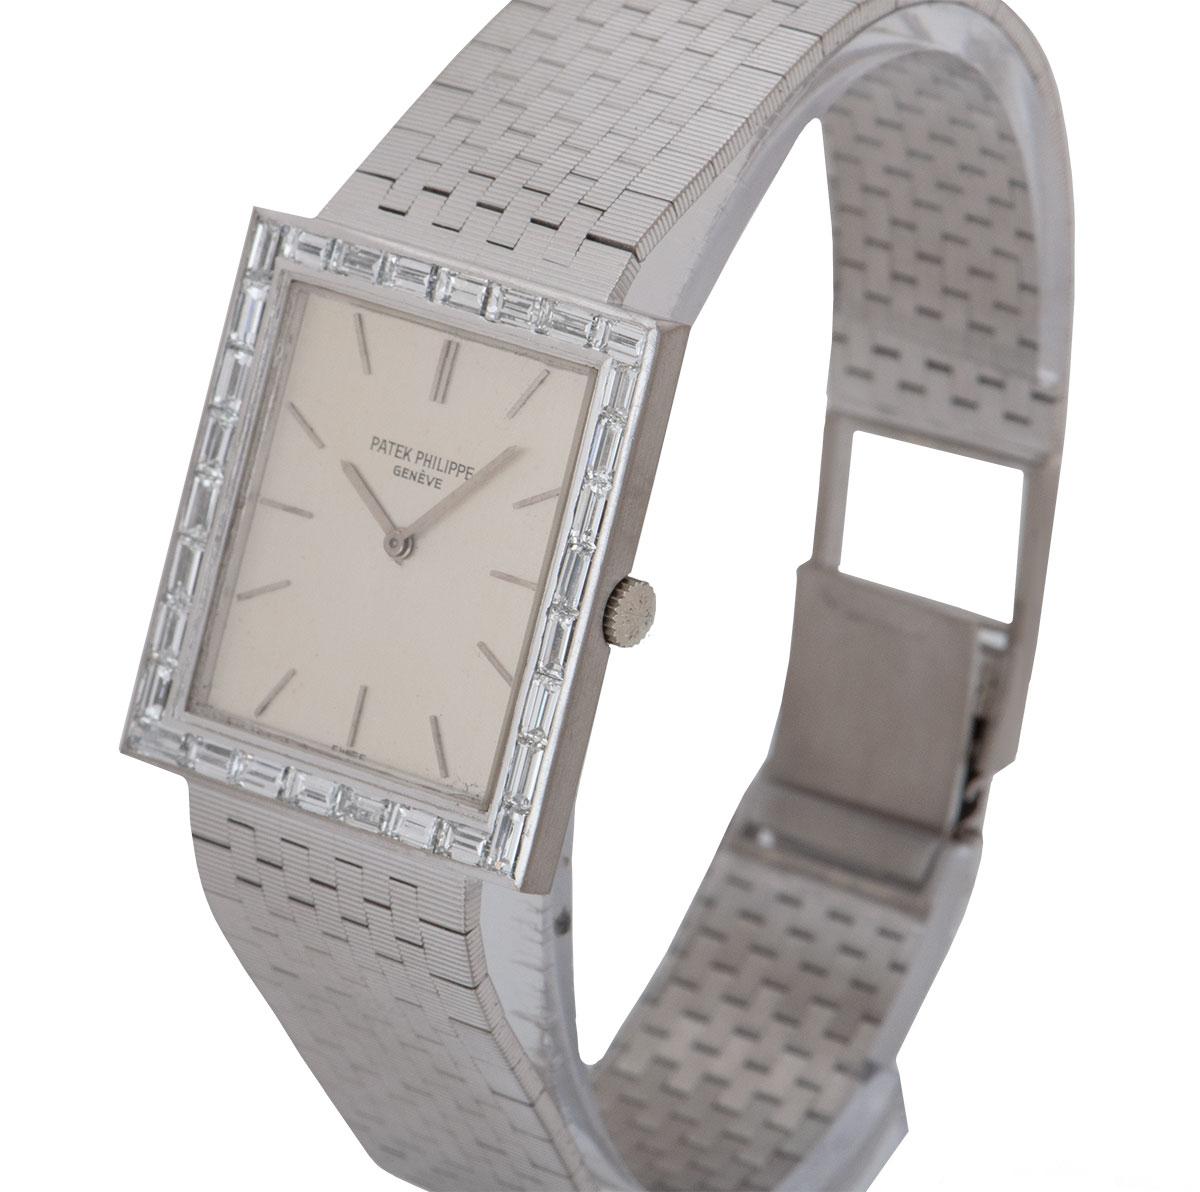 A vintage 18k white gold unisex wristwatch, by Patek Philippe.

The silver dial with applied hour markers, is protected by a mineral glass and surrounded by a fixed bezel which is set with 30 baguette cut diamonds.

This opulent timepiece is fitted